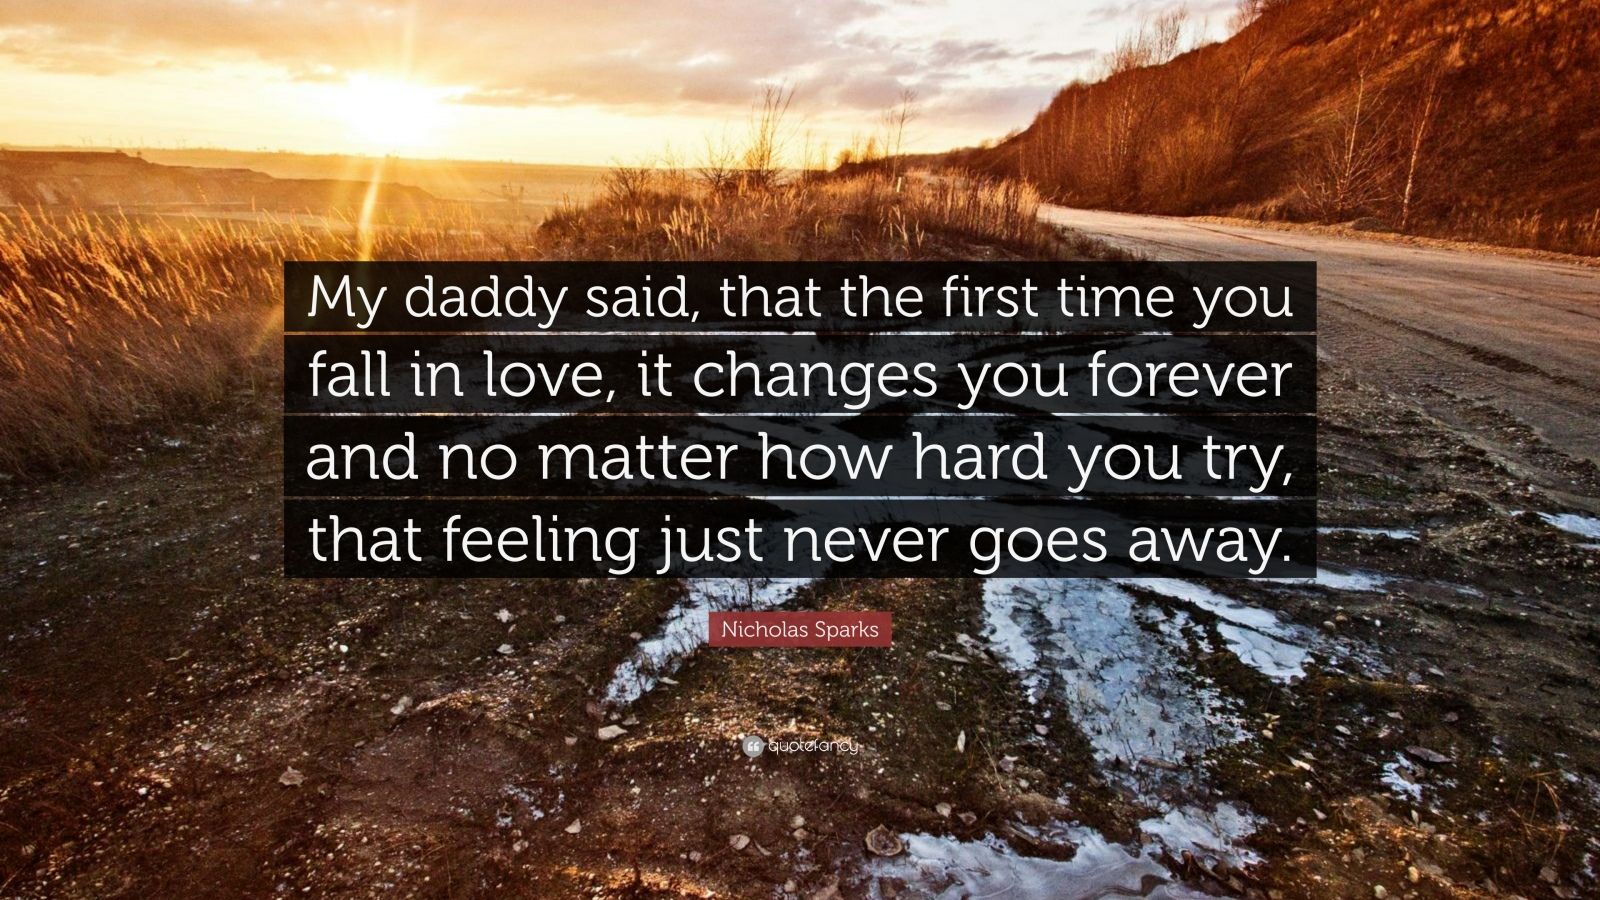 Nicholas Sparks Quote: “My daddy said, that the first time you fall in ...